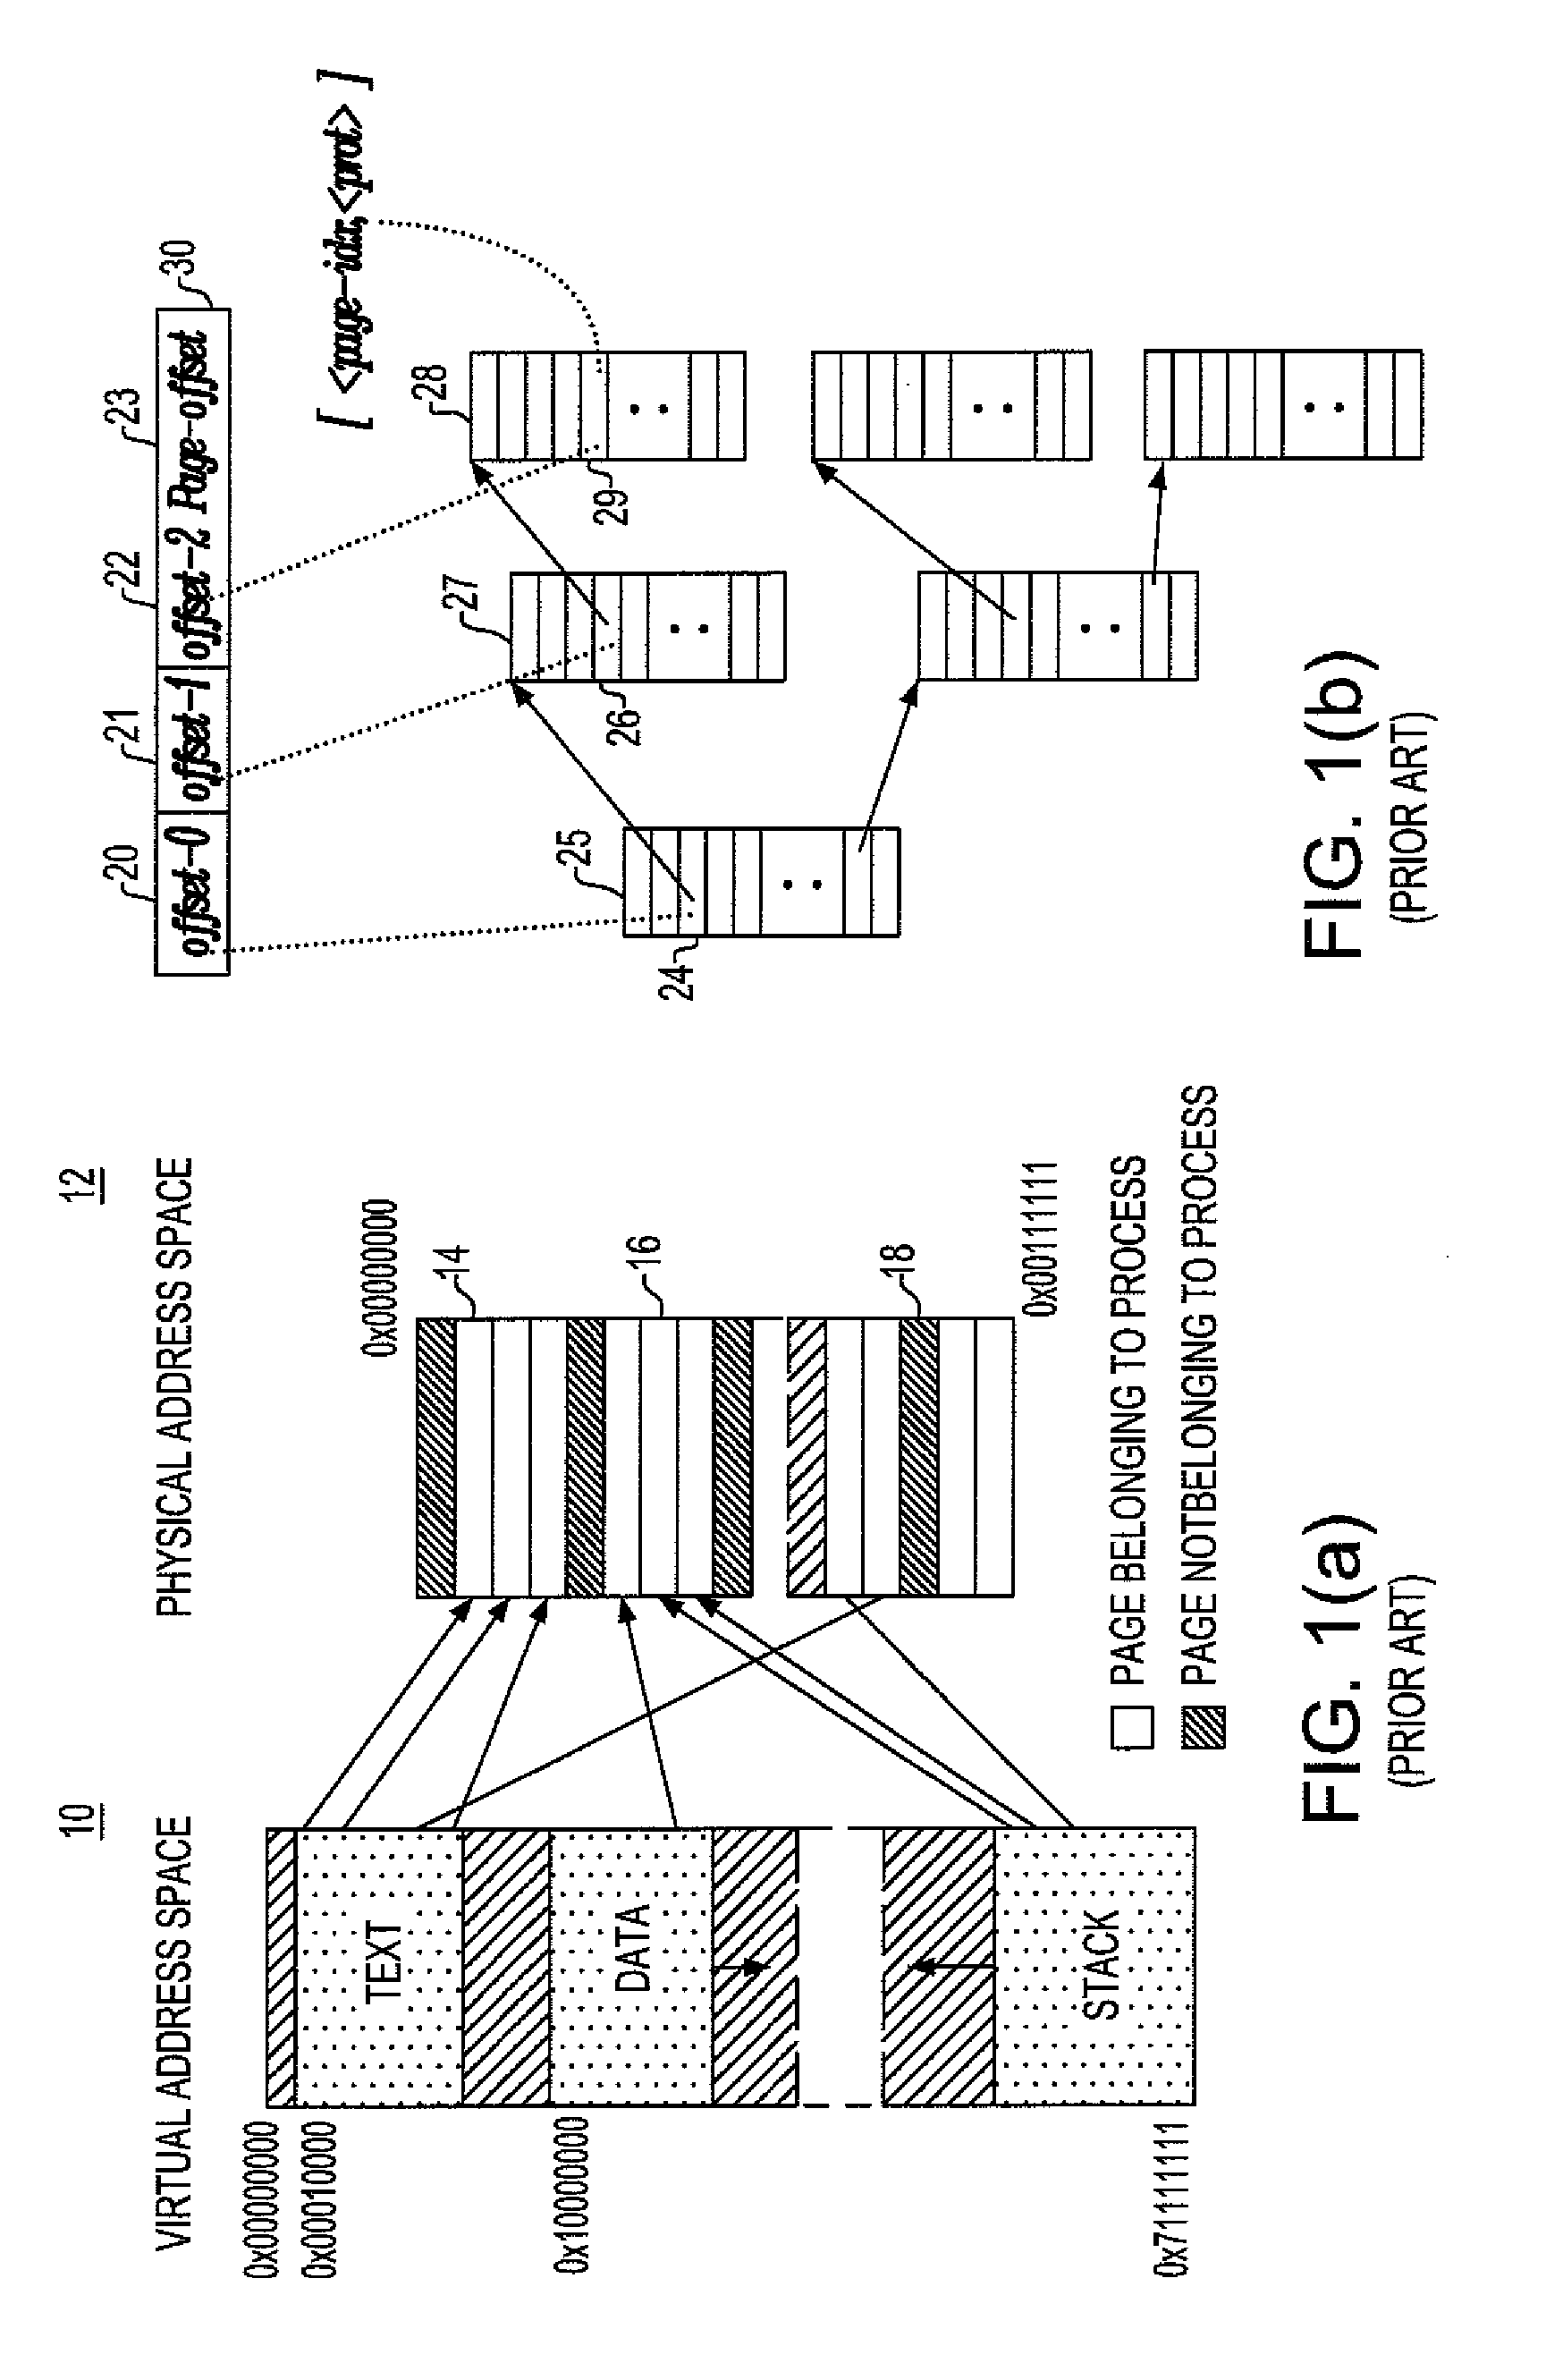 Method and apparatus for managing software controlled cache of translating the physical memory access of a virtual machine between different levels of translation entities